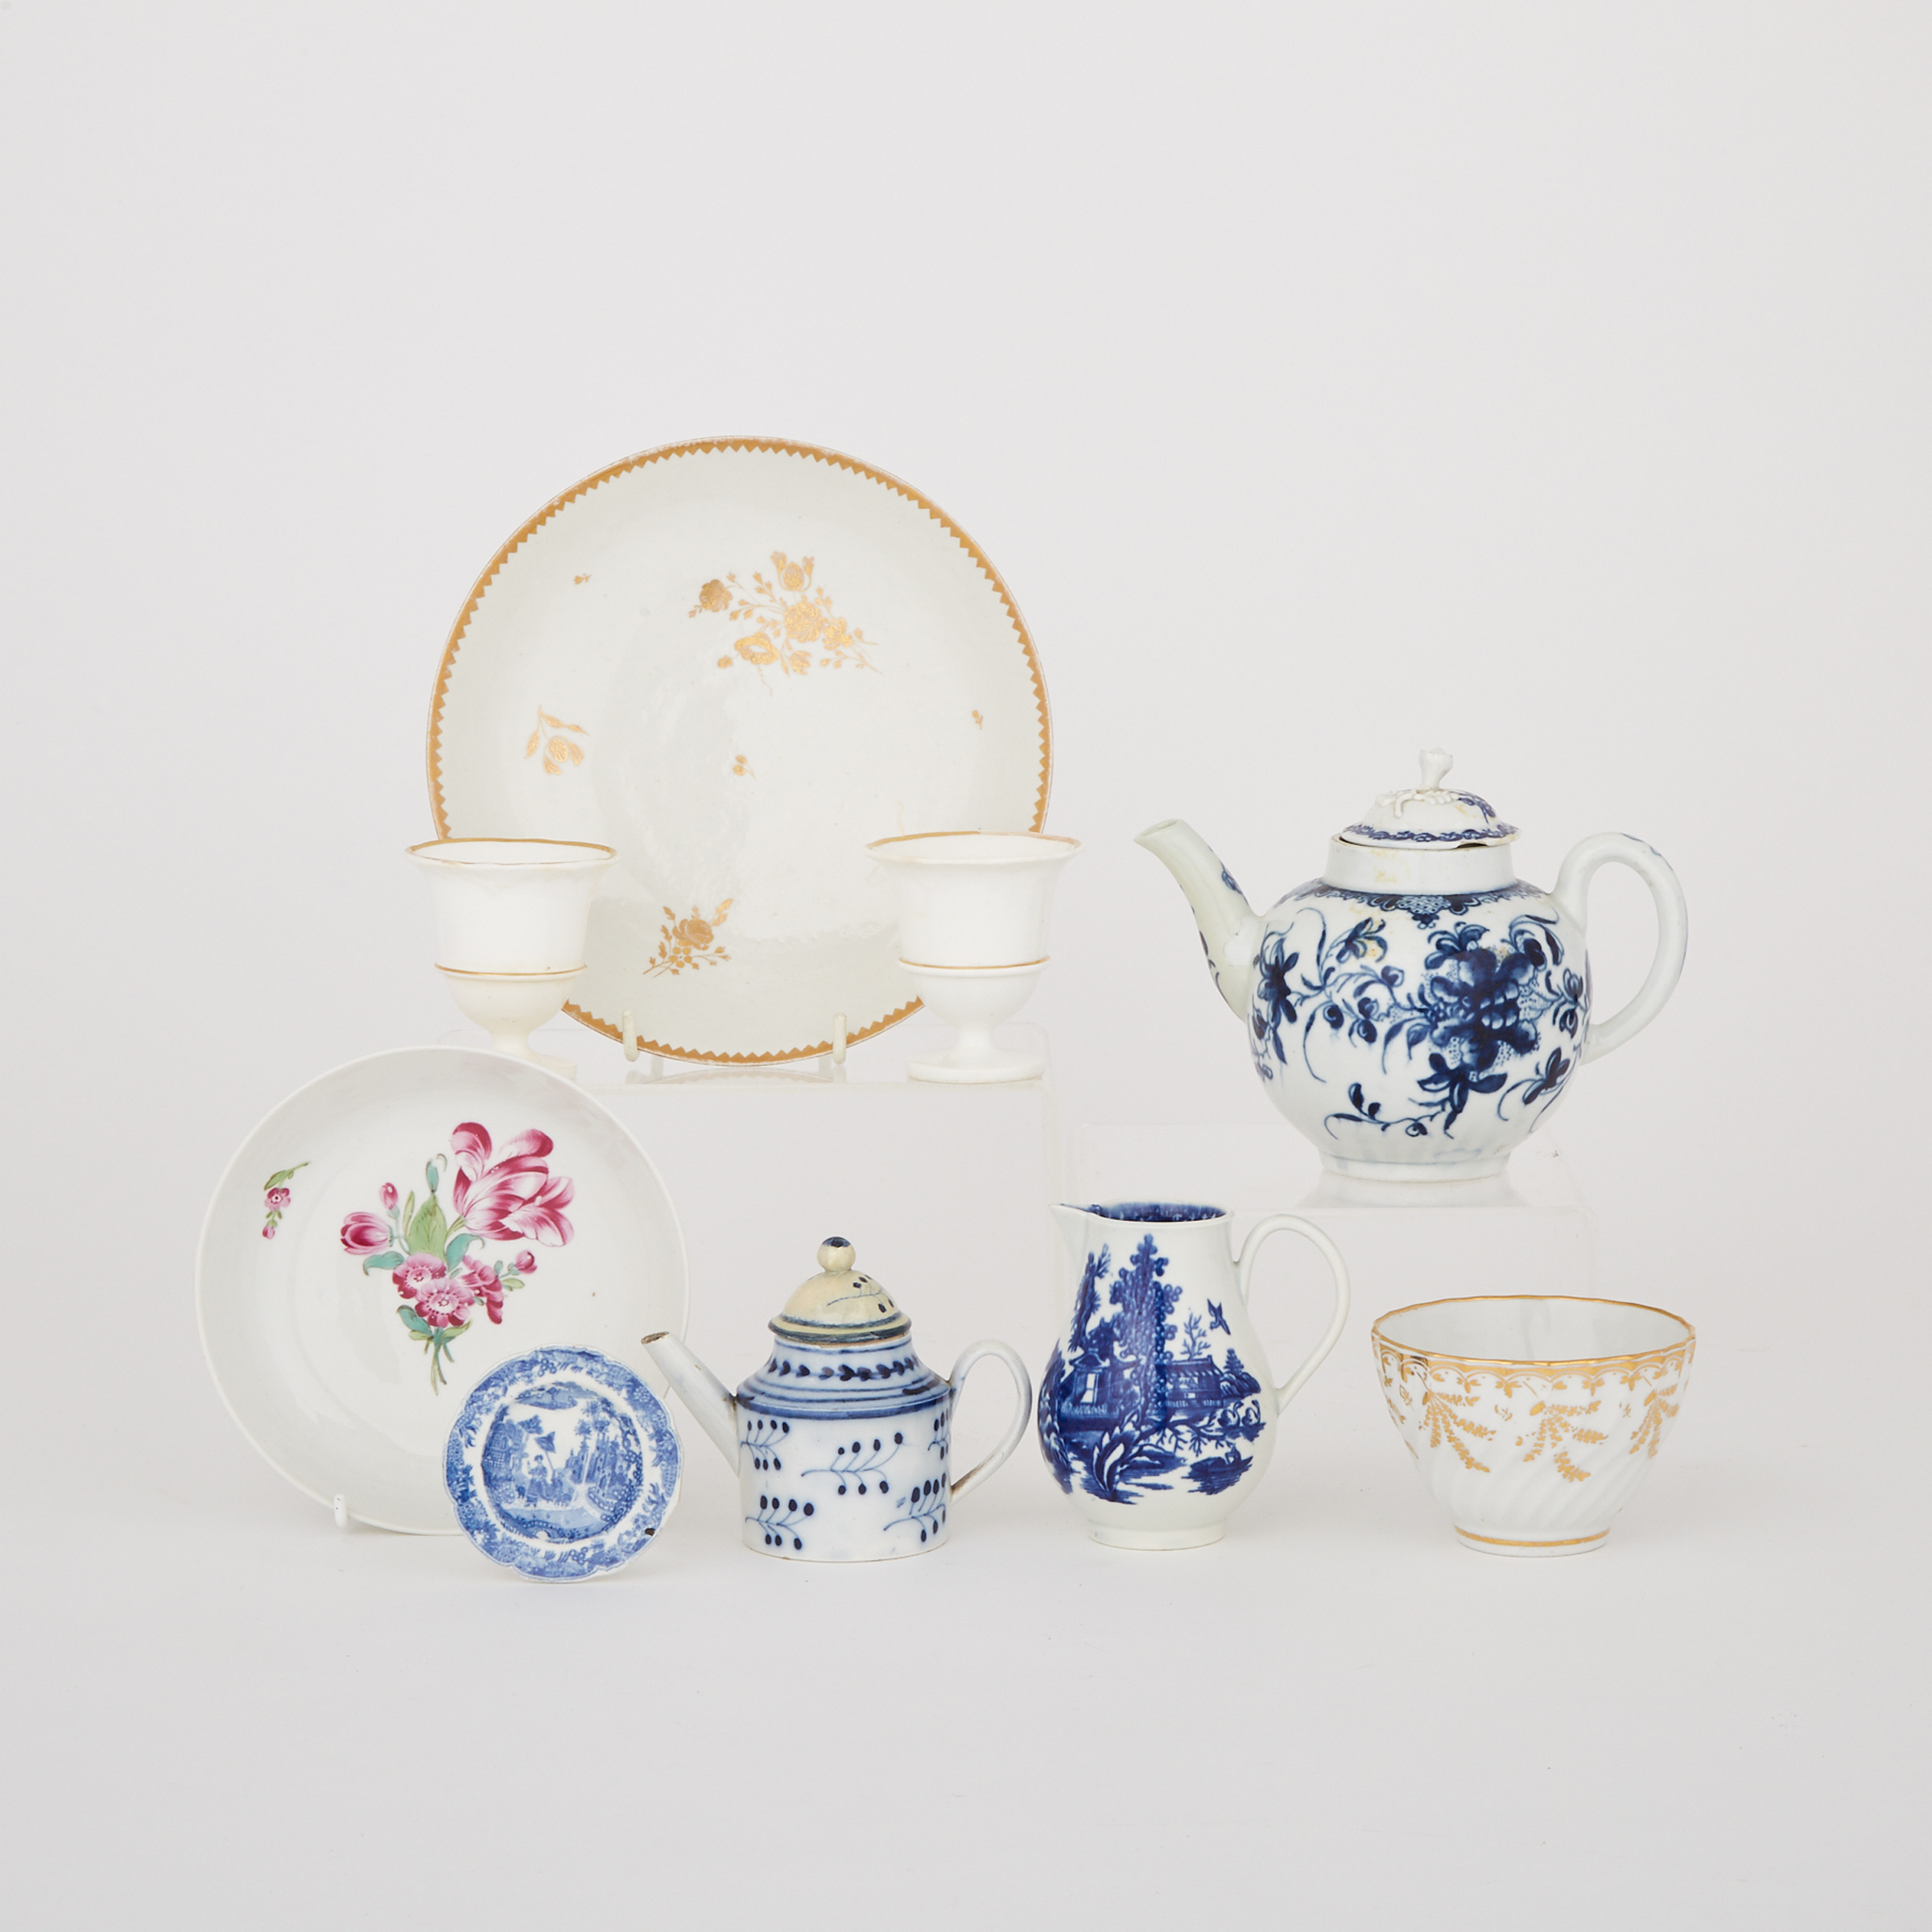 Group of English and Continental Porcelain, 18th/19th century 